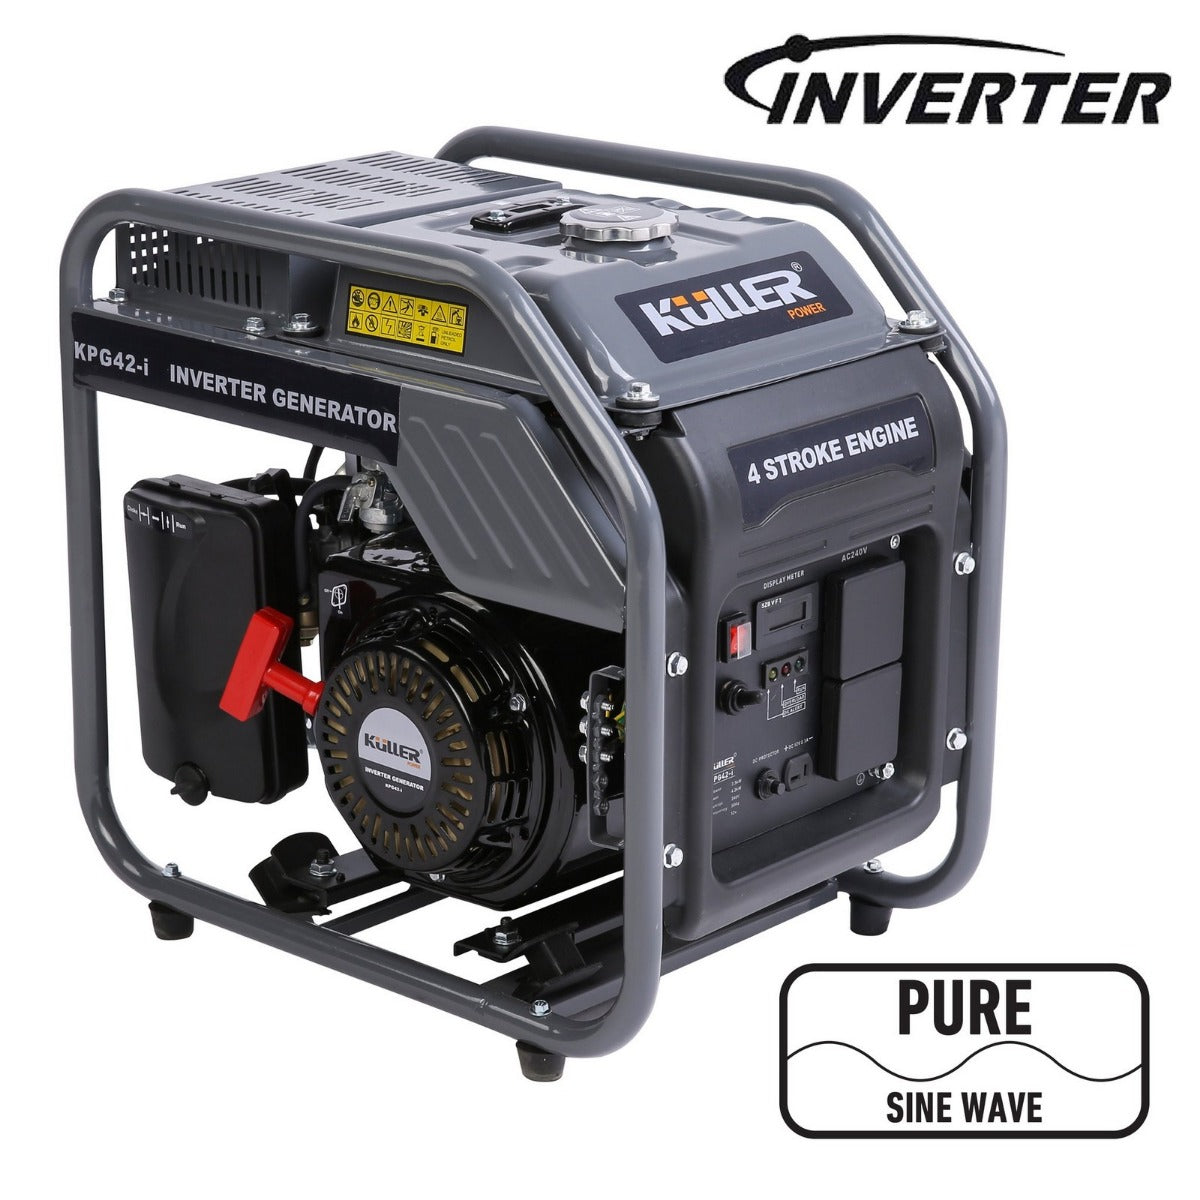 Kuller 4.2kW Max 3.5kW Rated Inverter Generator Pure Sine Wave Single-Phase Petrol DC Output Camping